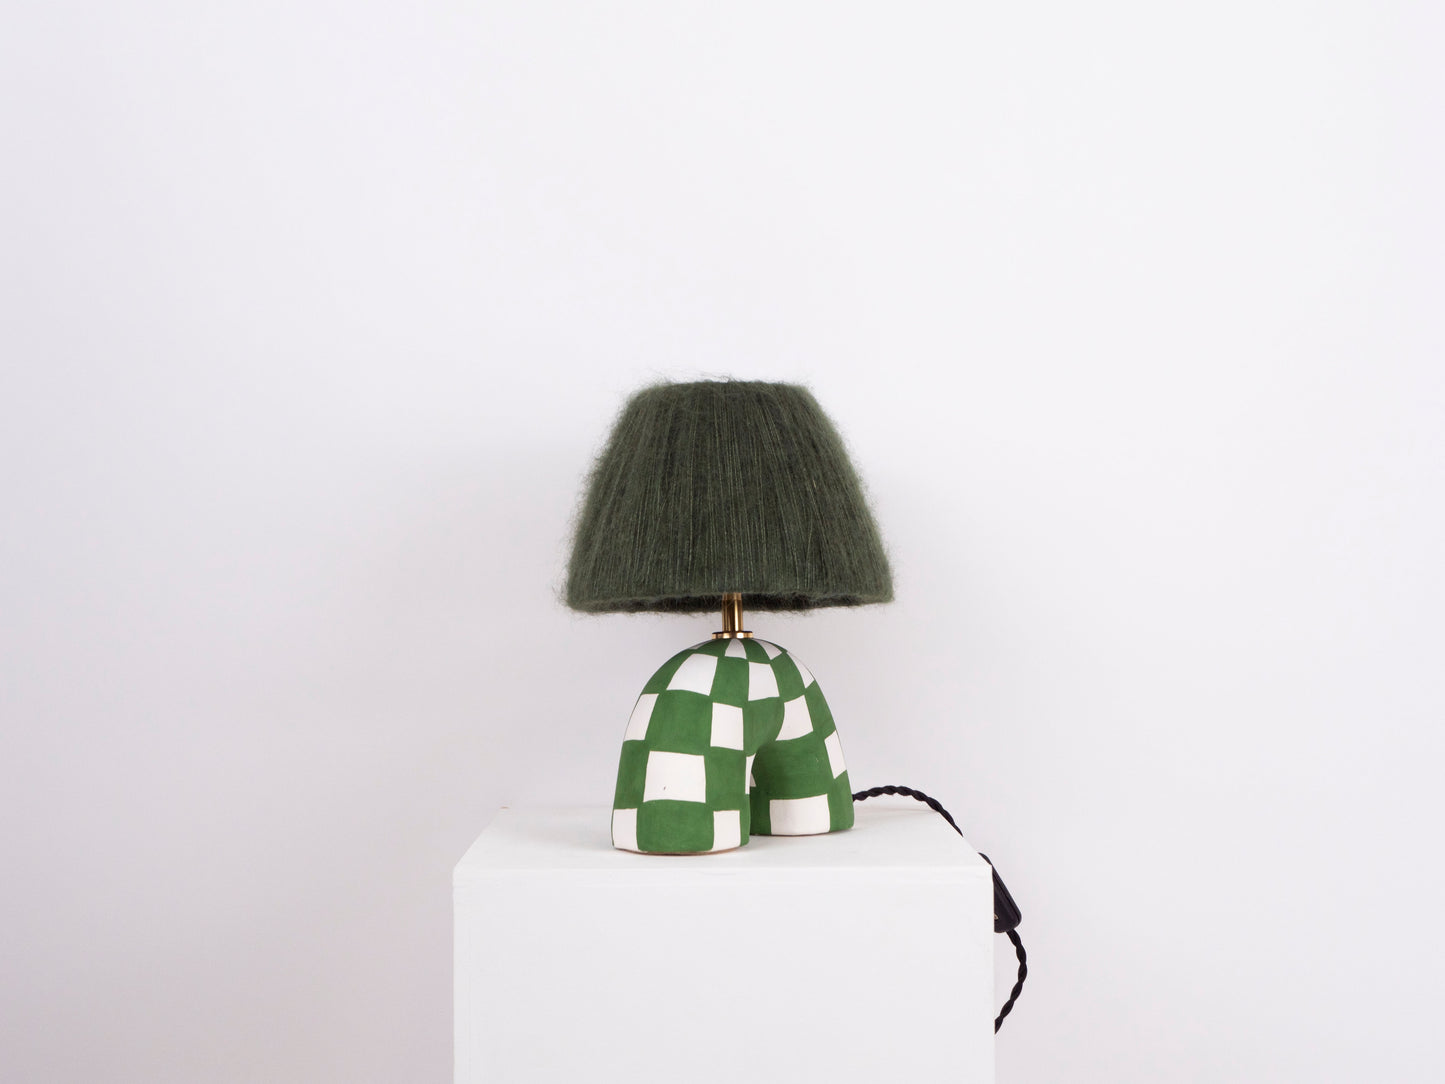 'Me' Table Lamp - Forest Green Check